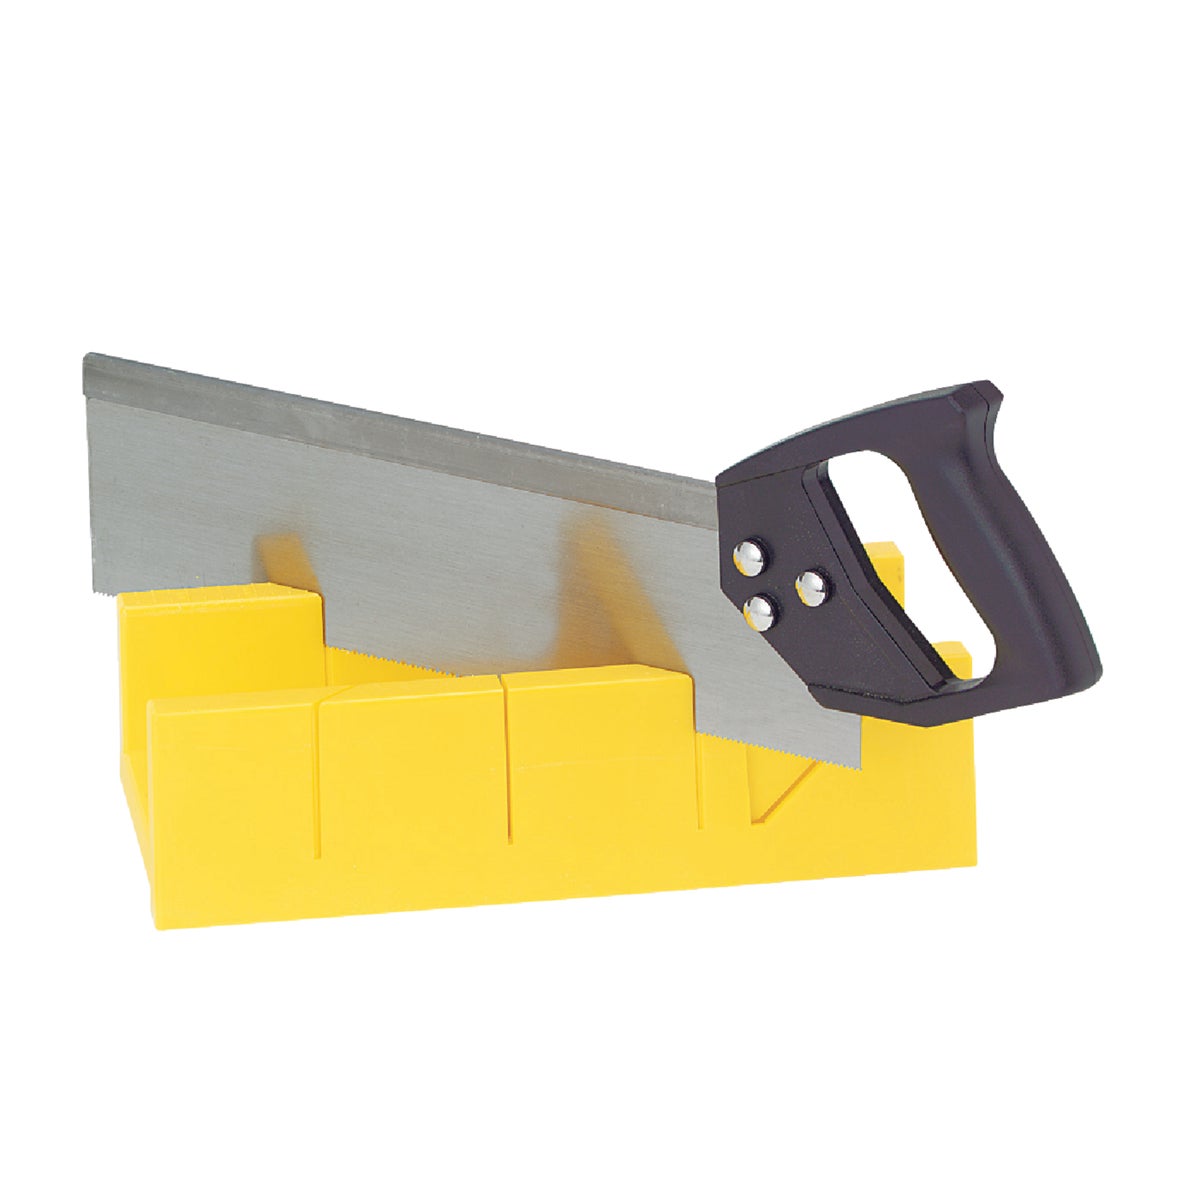 Item 340588, 12" poly miter box with ruled edge and 14" spring steel mitre backsaw with 